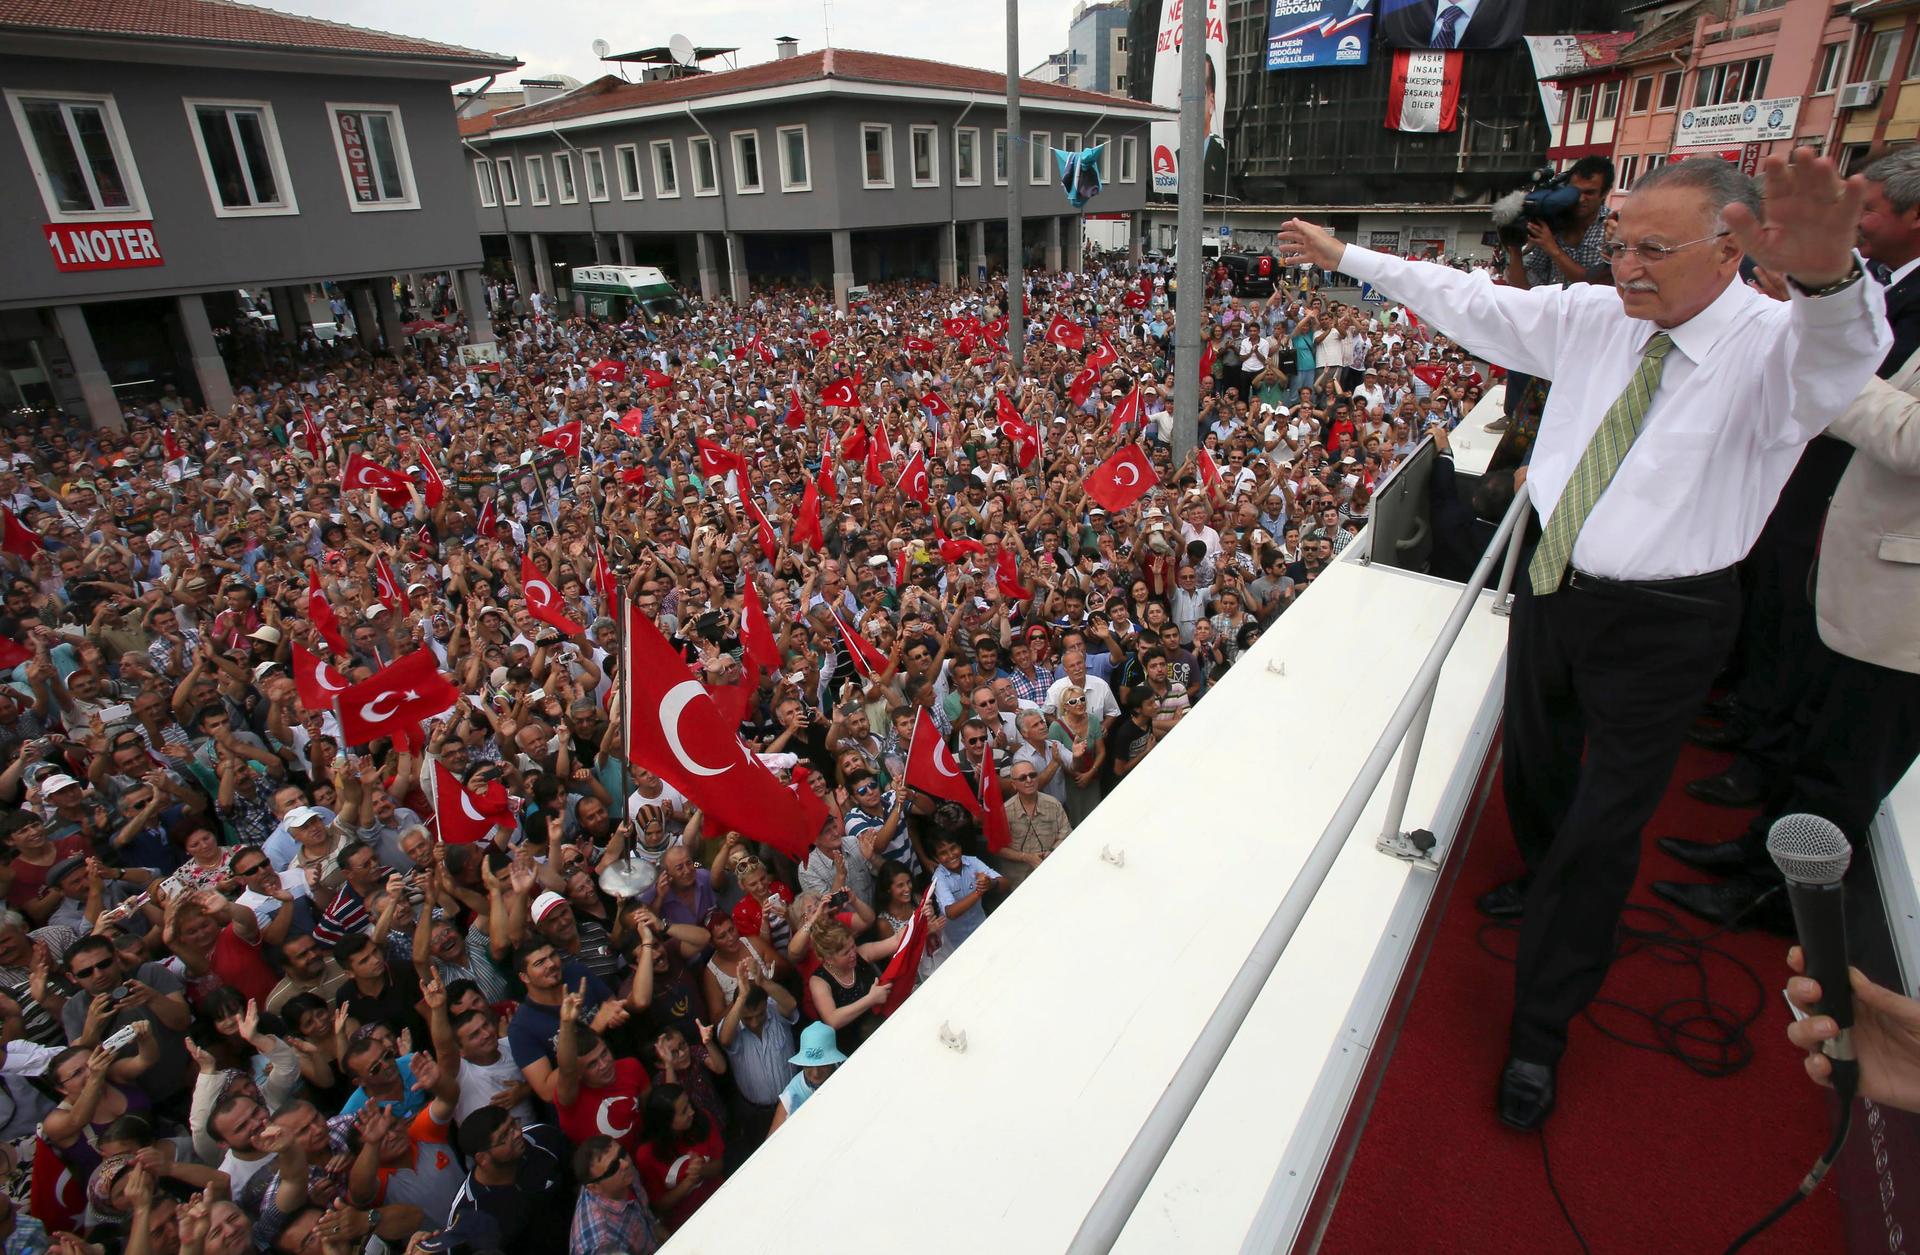 Turkey's main opposition presidential candidate Ekmeleddin Ihsanoglu greets his supporters during an election rally in Balikesir August 8, 2014.